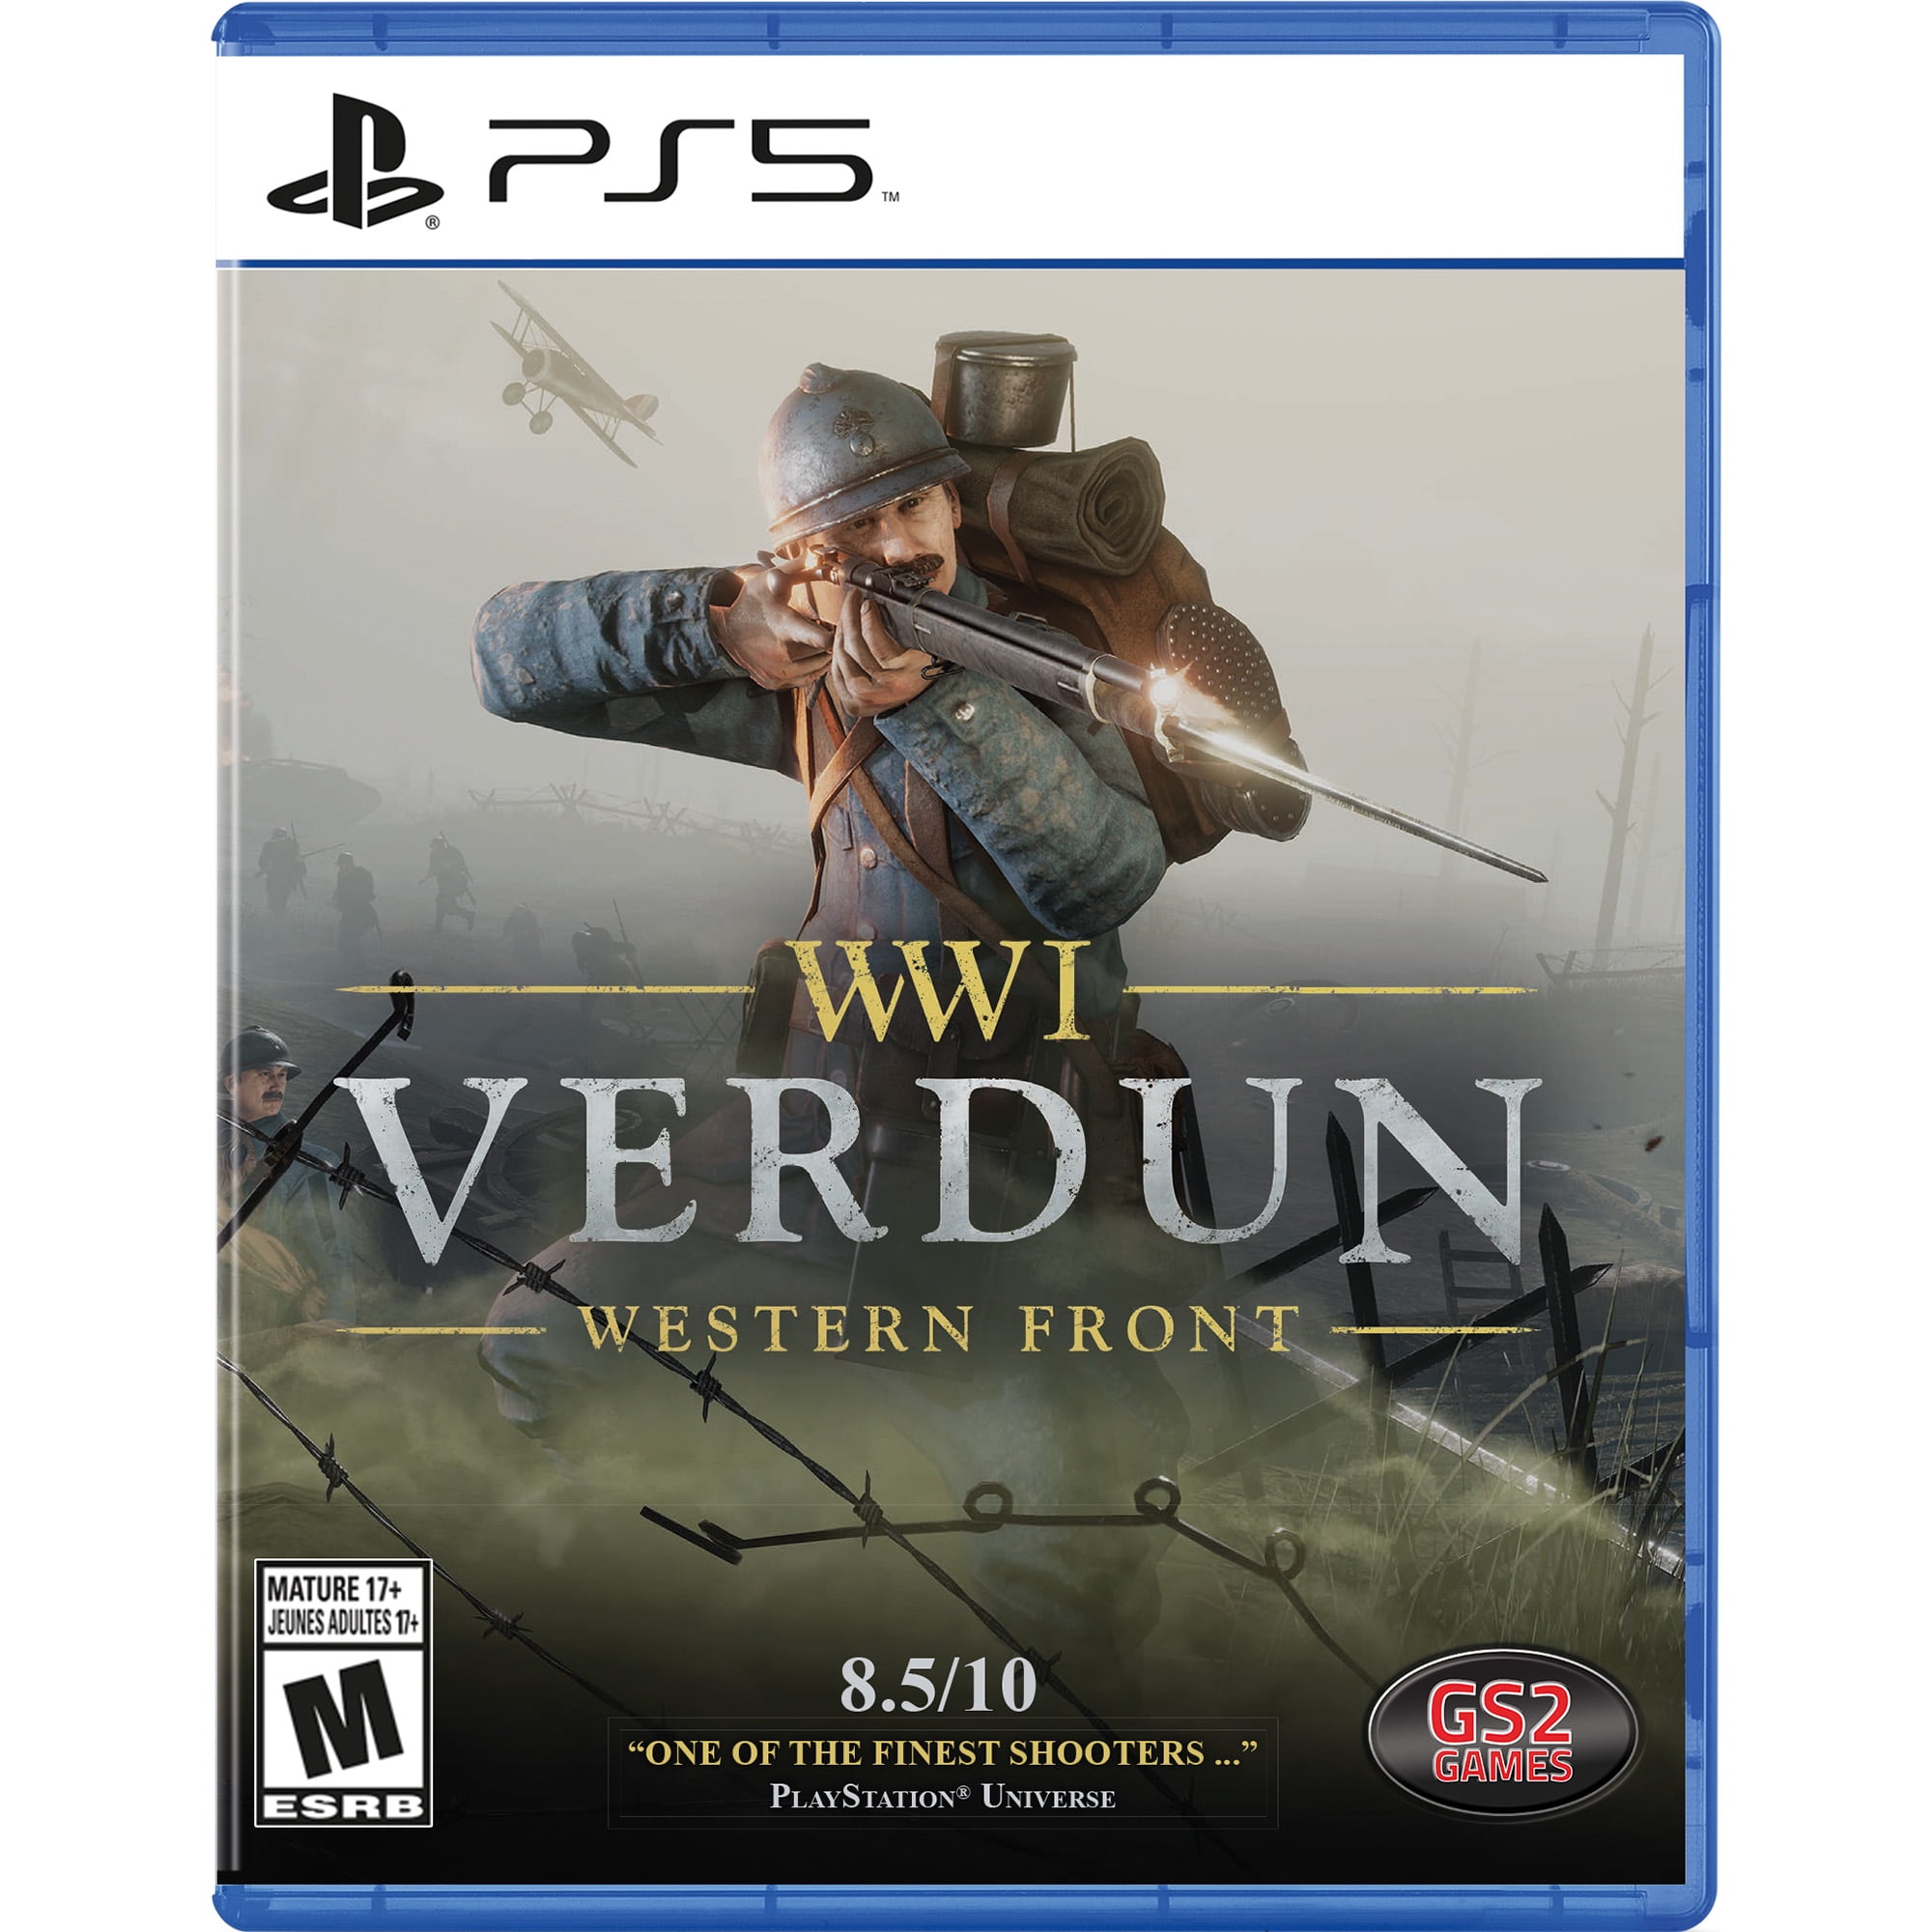 WWI Verdun - Western Front, GS2 GAMES, PlayStation 5, 850017102651